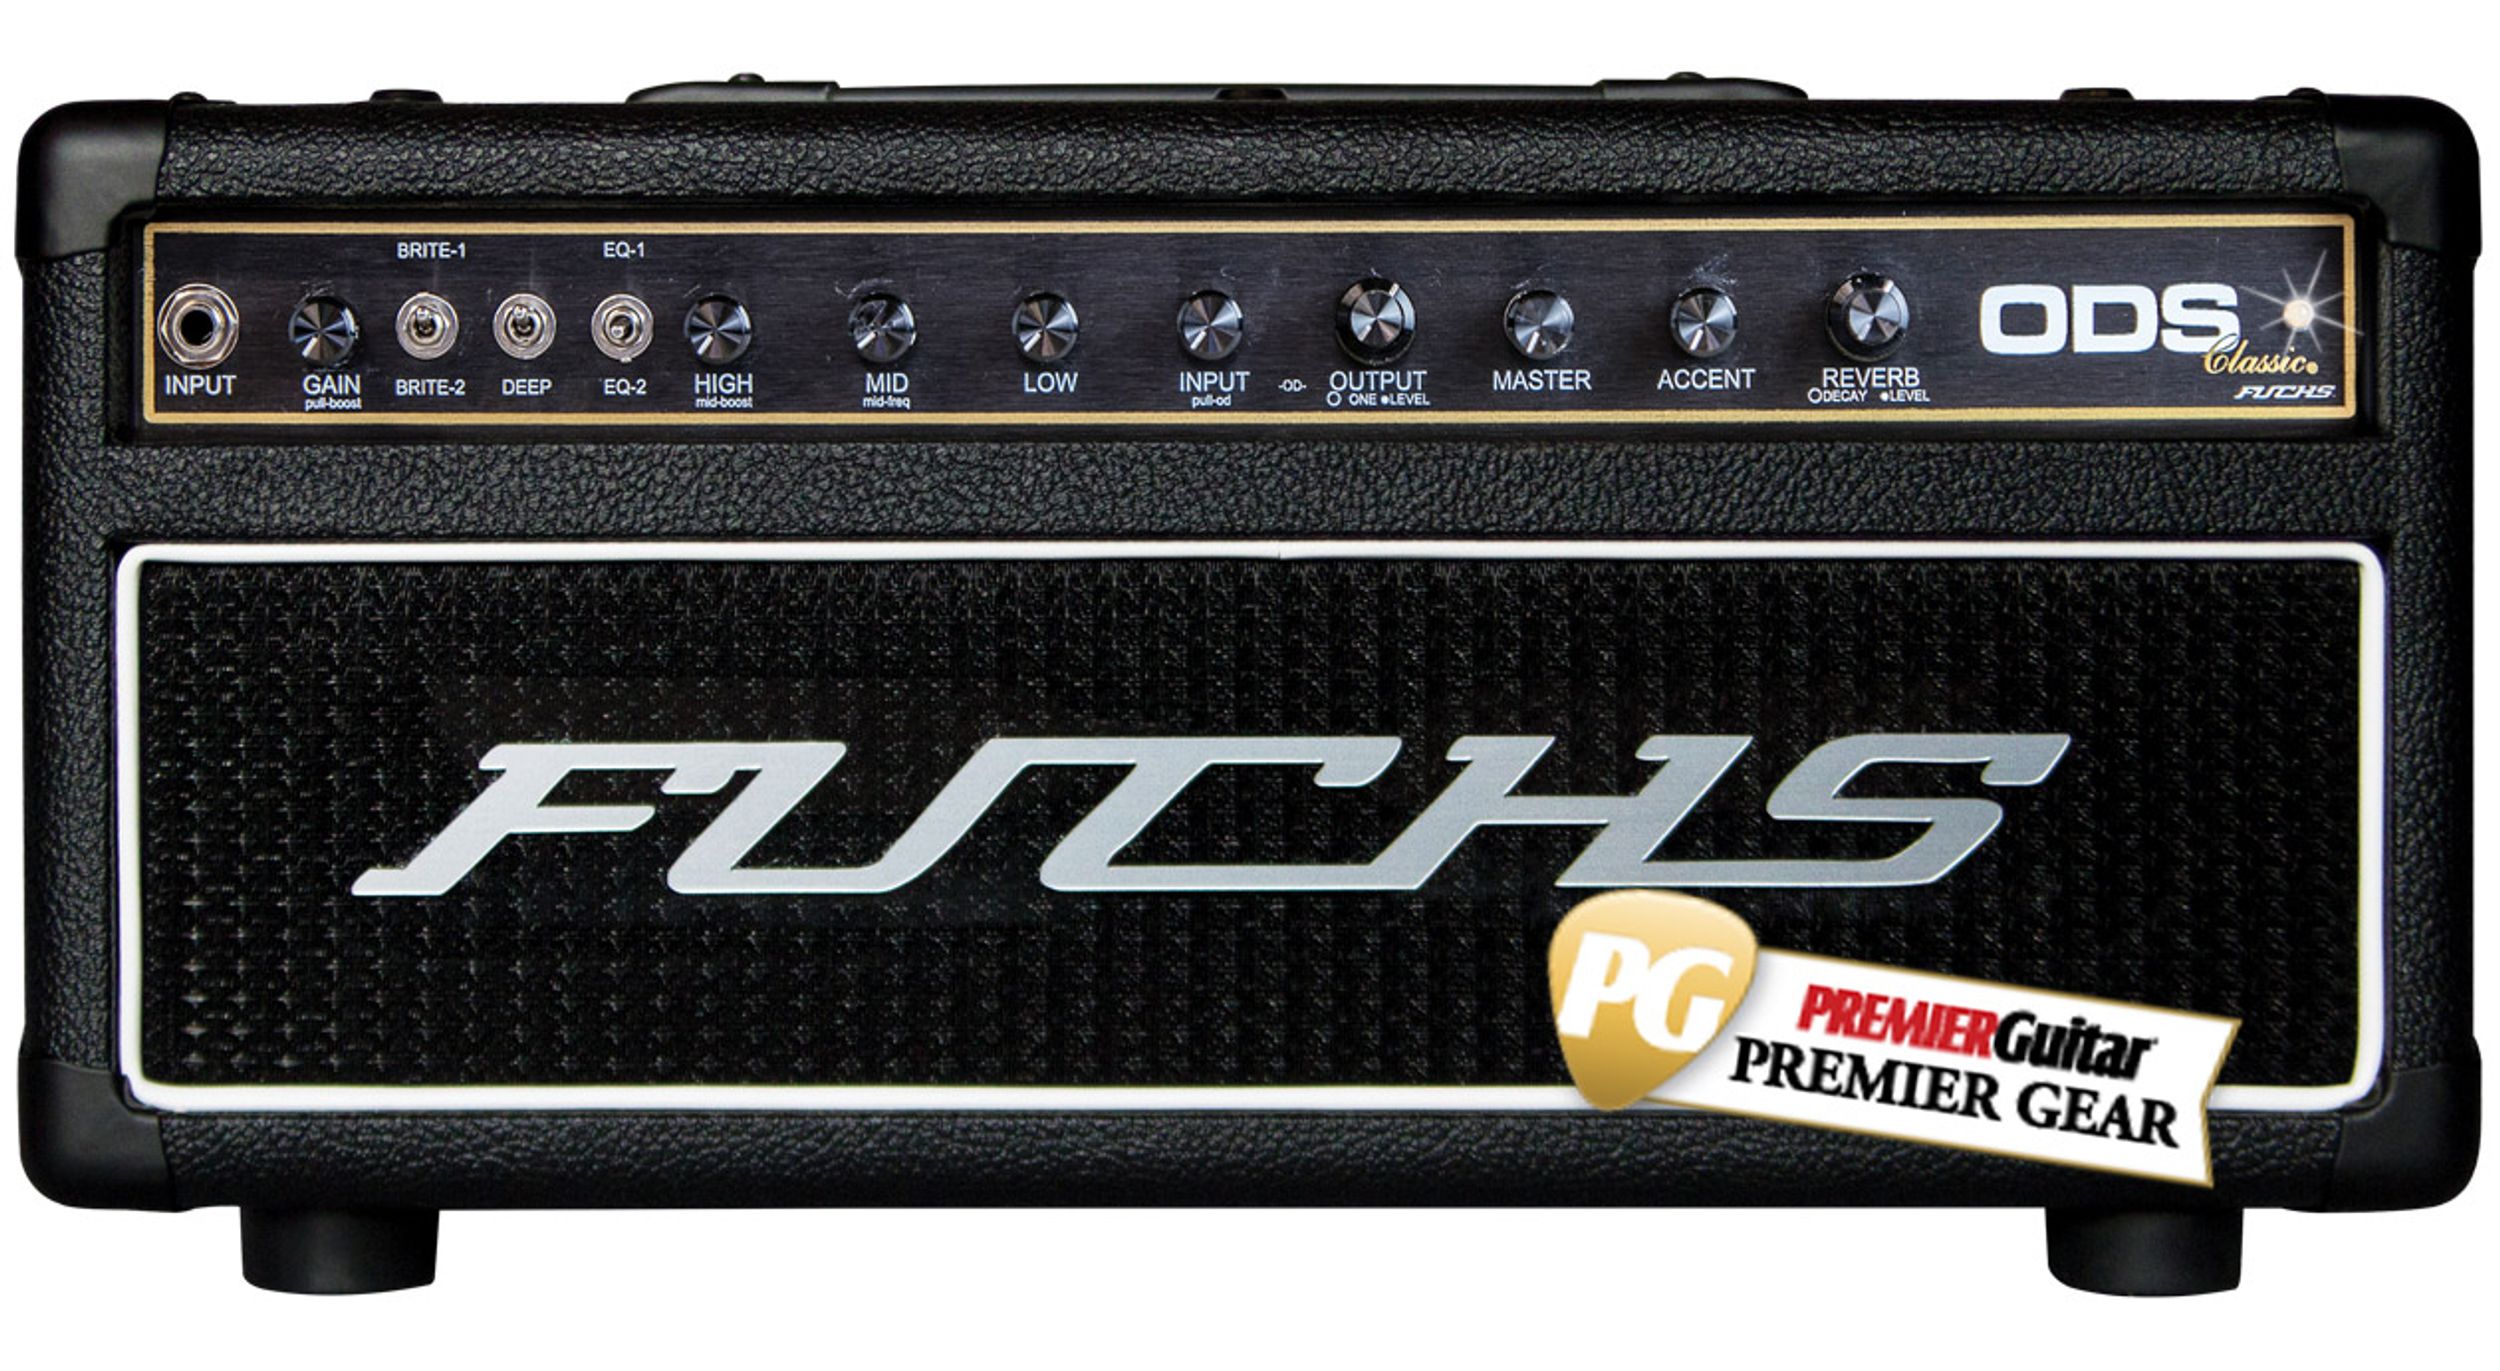 Fuchs ODS Classic Review